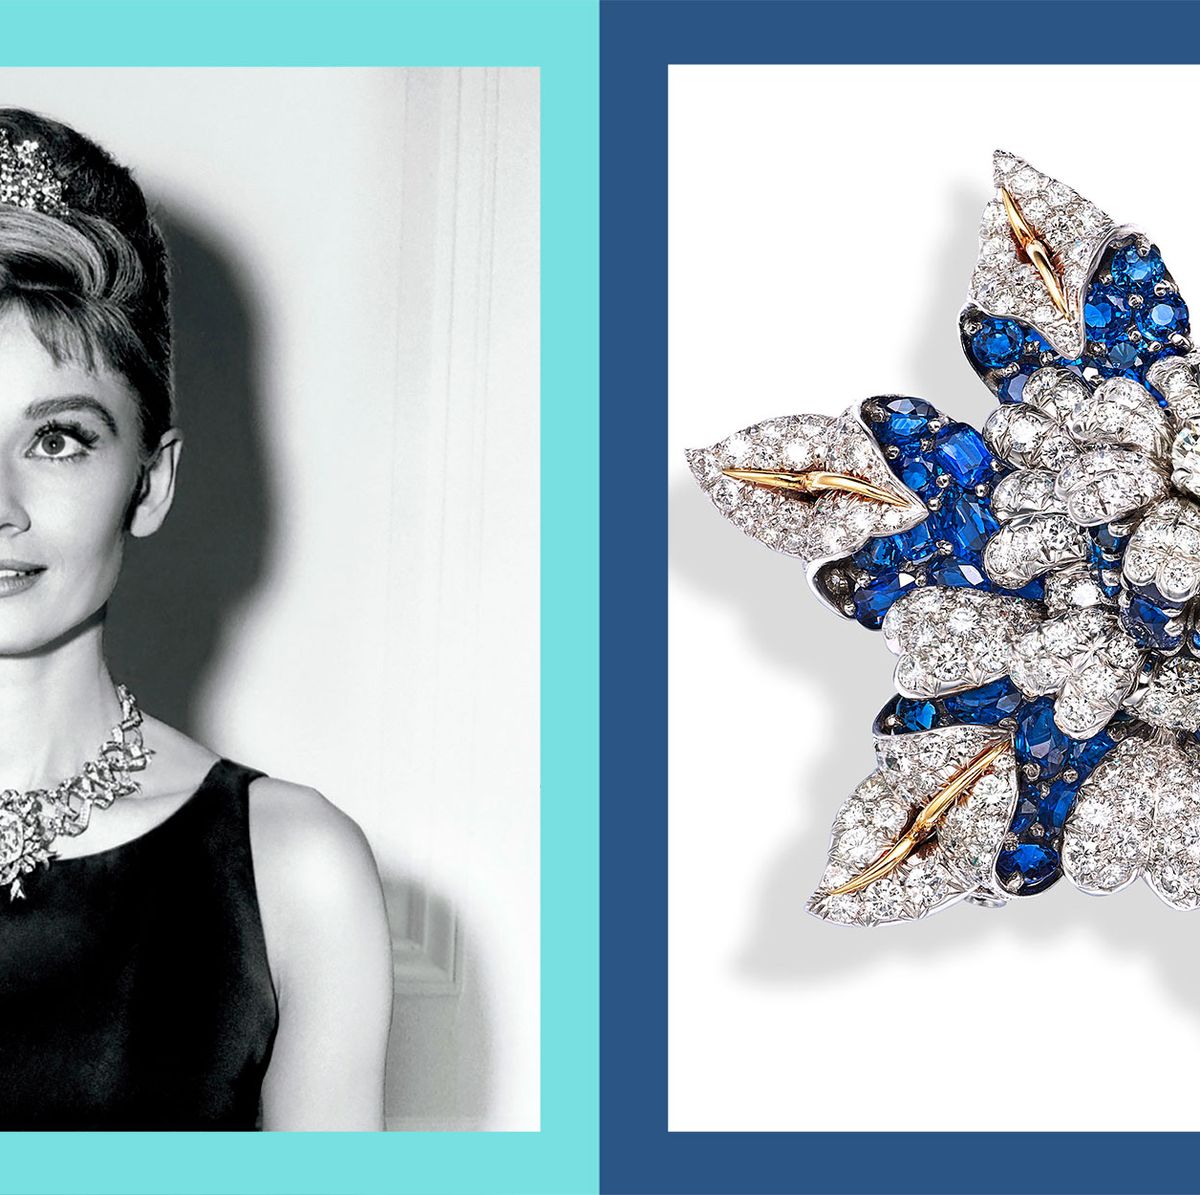 Tiffany & Co. Will Exhibit Its Jewels at London's Saatchi Gallery